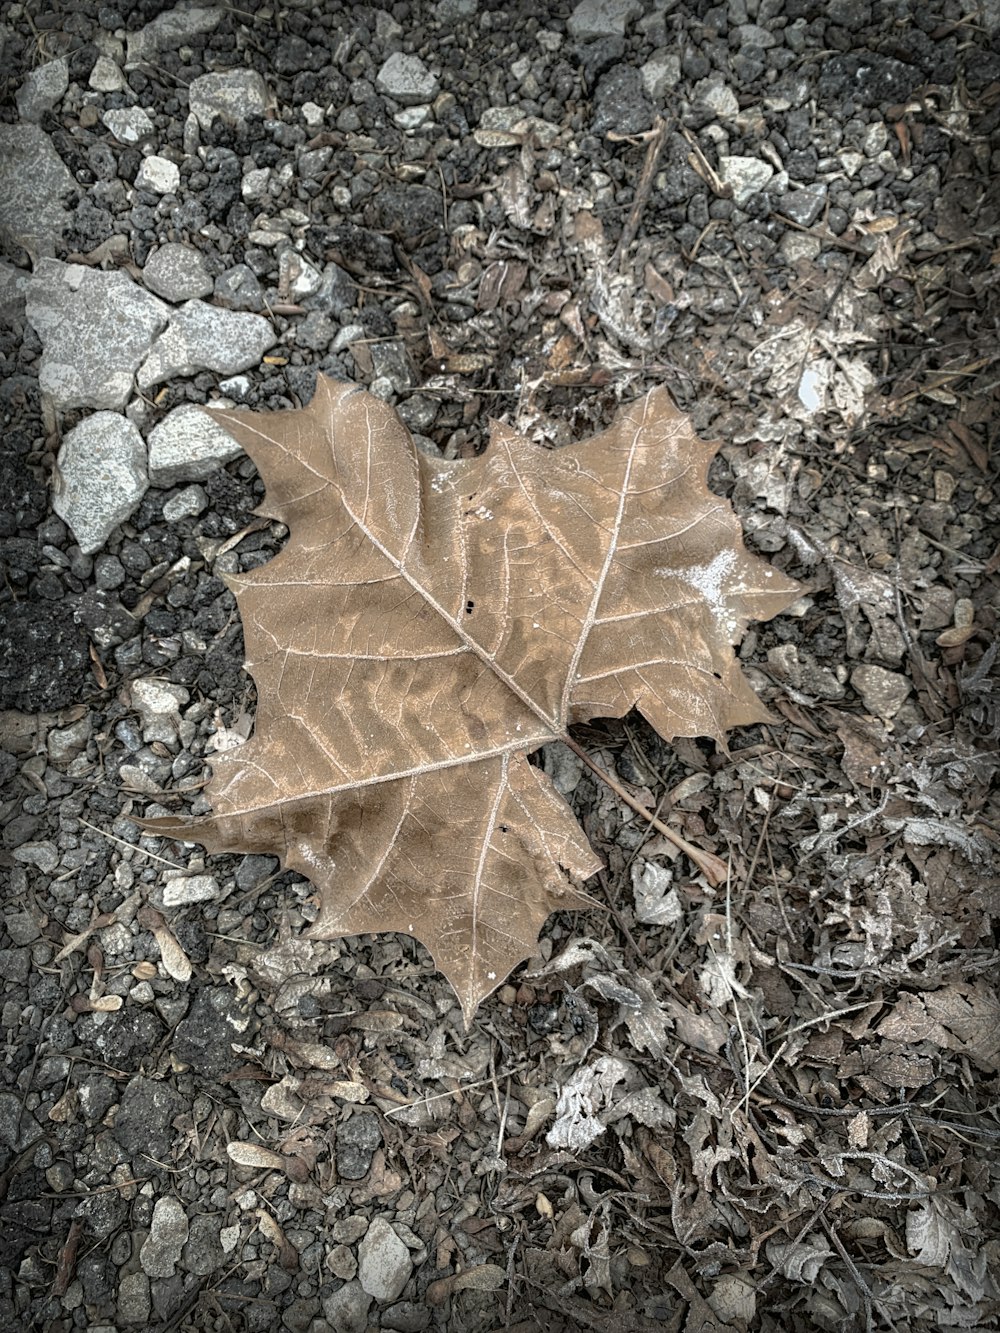 a leaf laying on the ground in the dirt